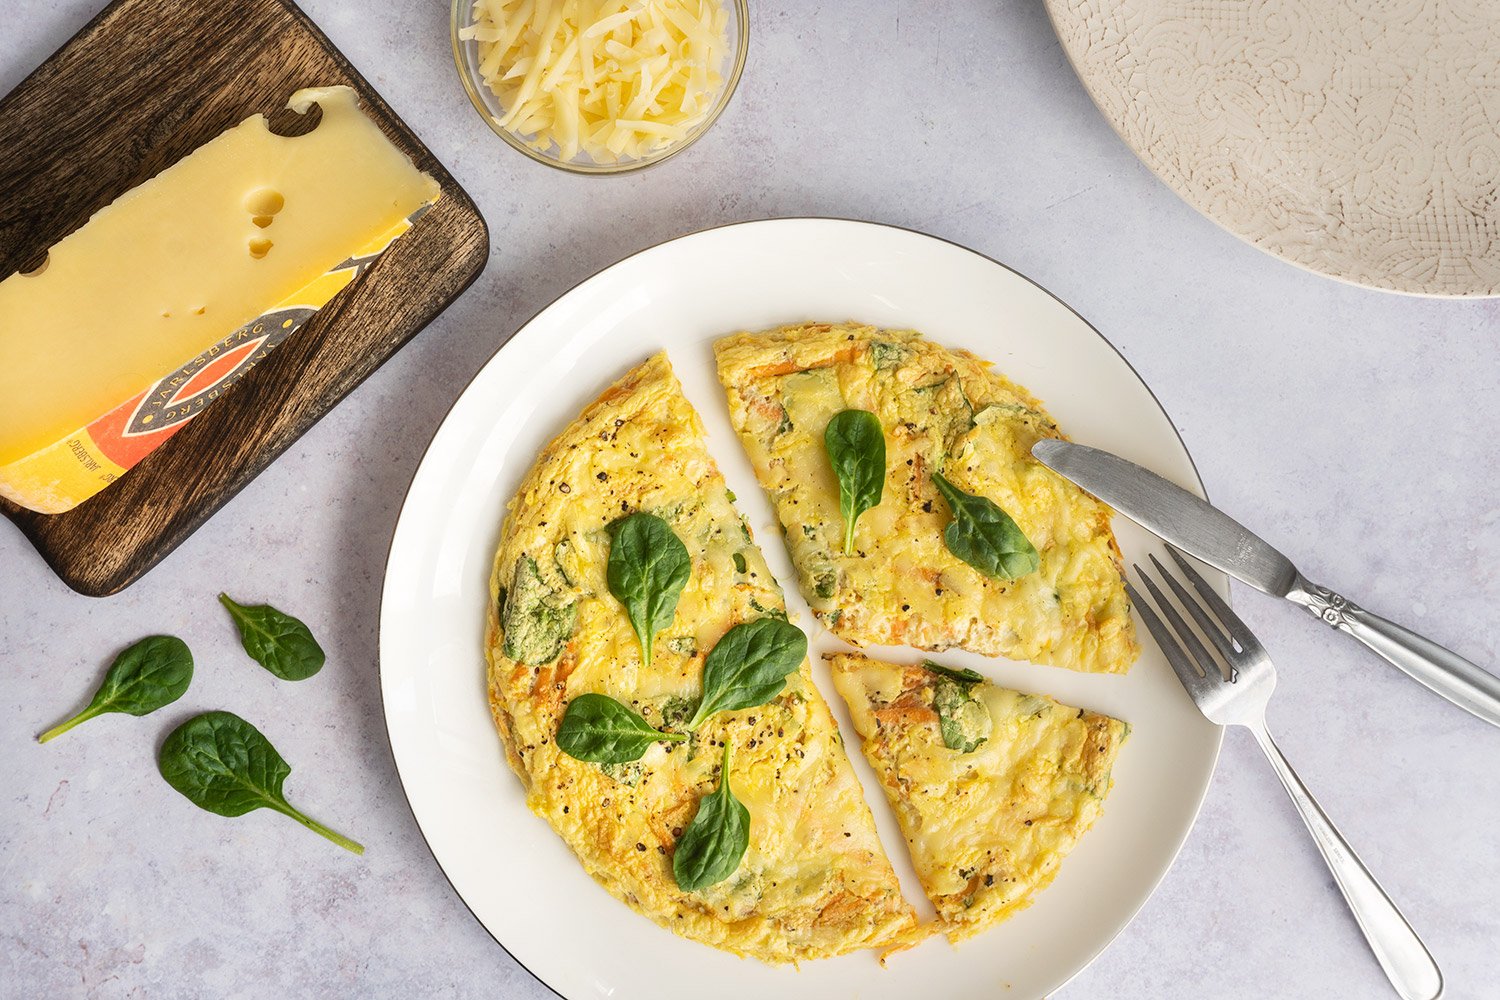 Recipe - Omelette soufflé with sweet potato, Jarlsberg cheese and spinach